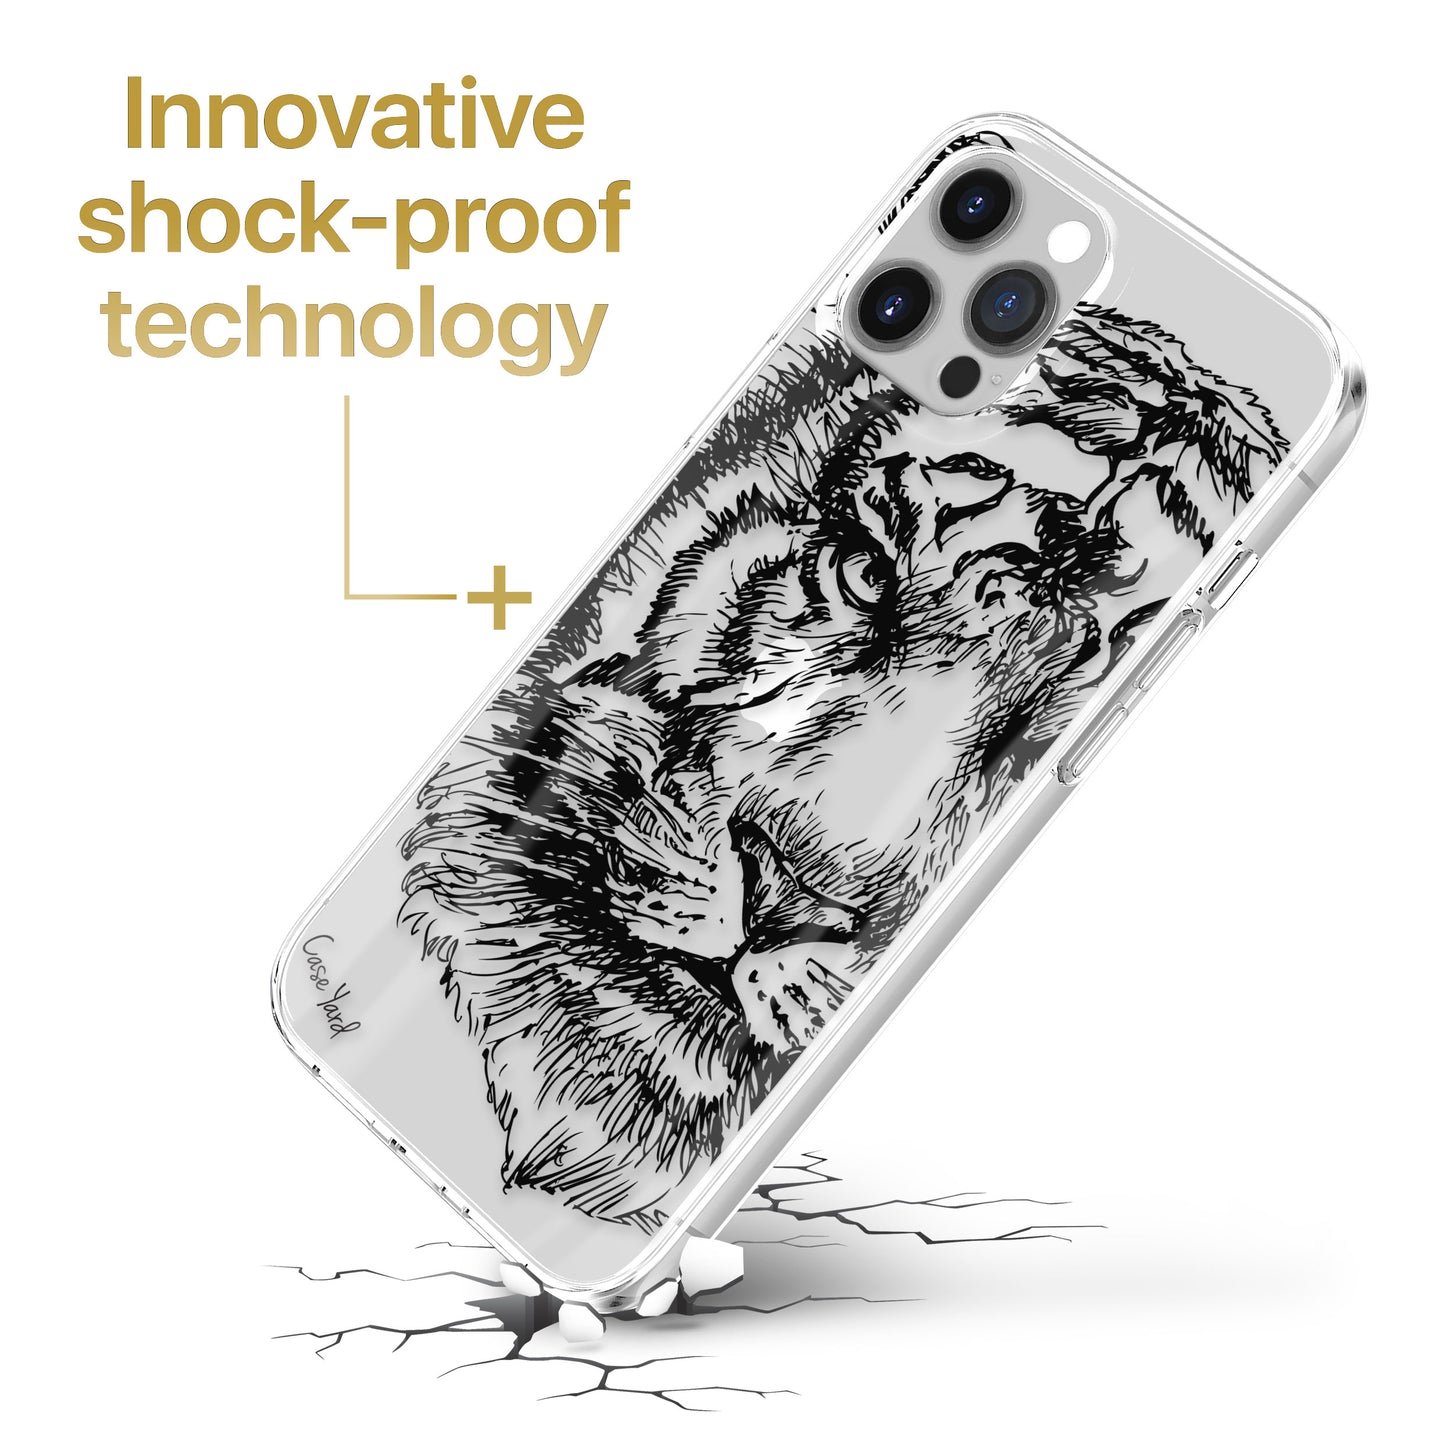 TPU Clear case with (Tiger Sketch) Design for iPhone & Samsung Phones